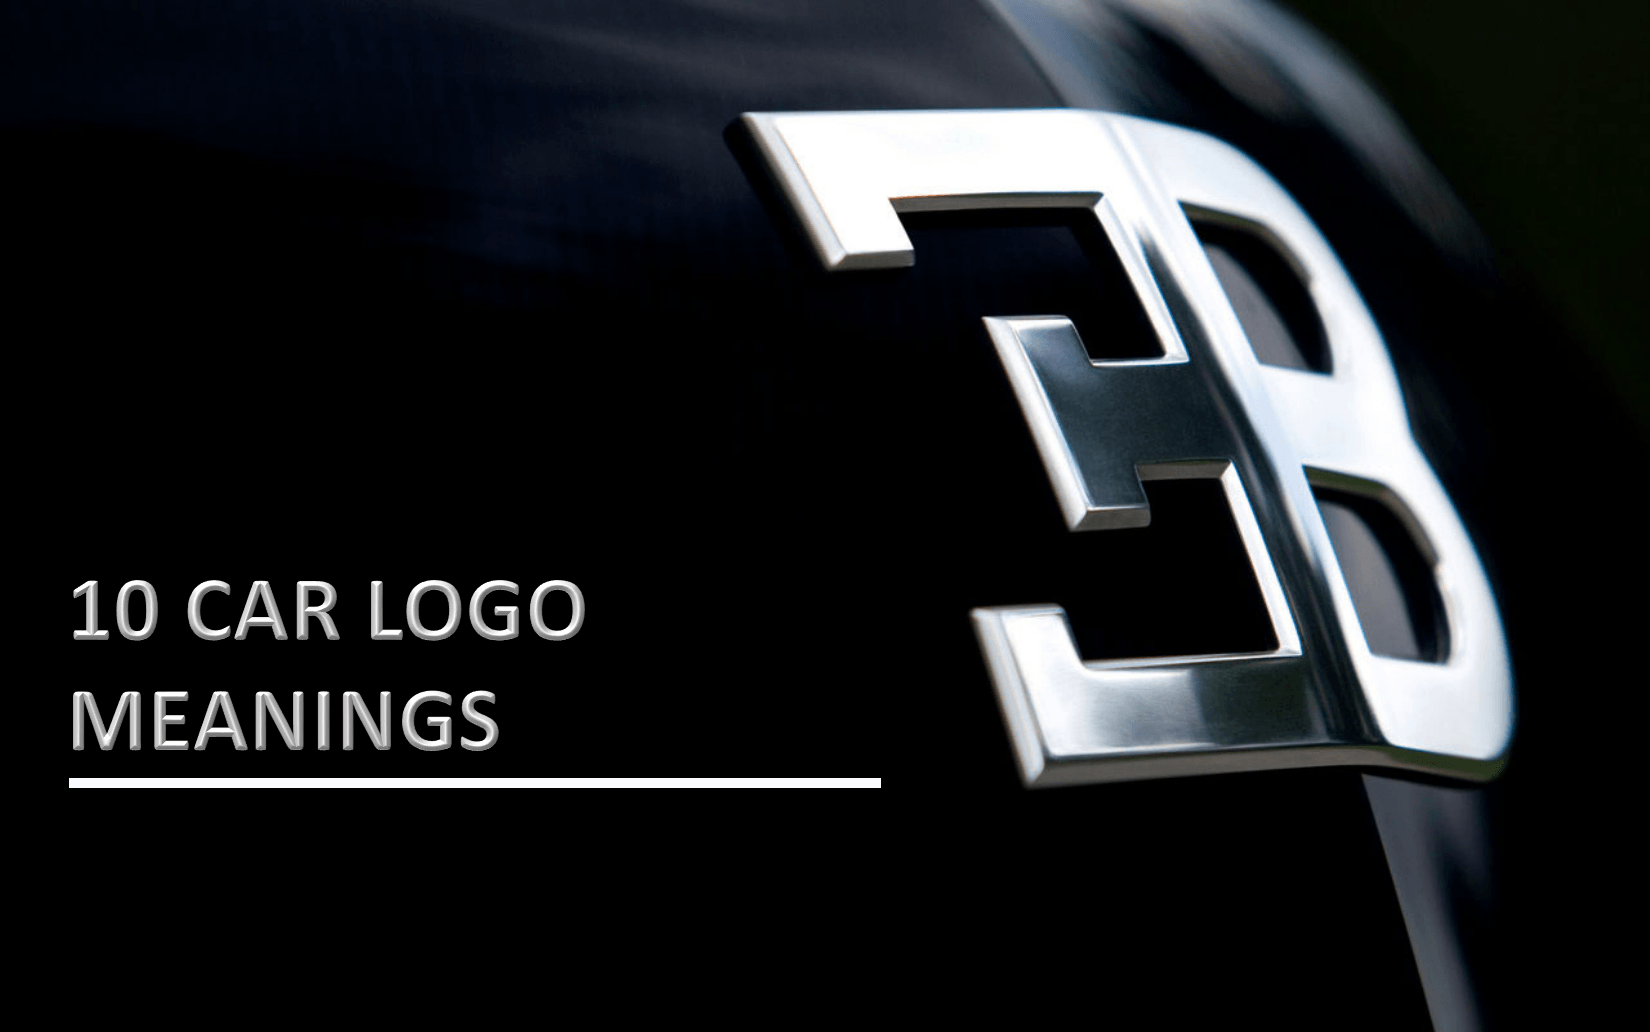 Luxury Car Logo - Car Logo Meanings You May Not Expect FROM JAPAN